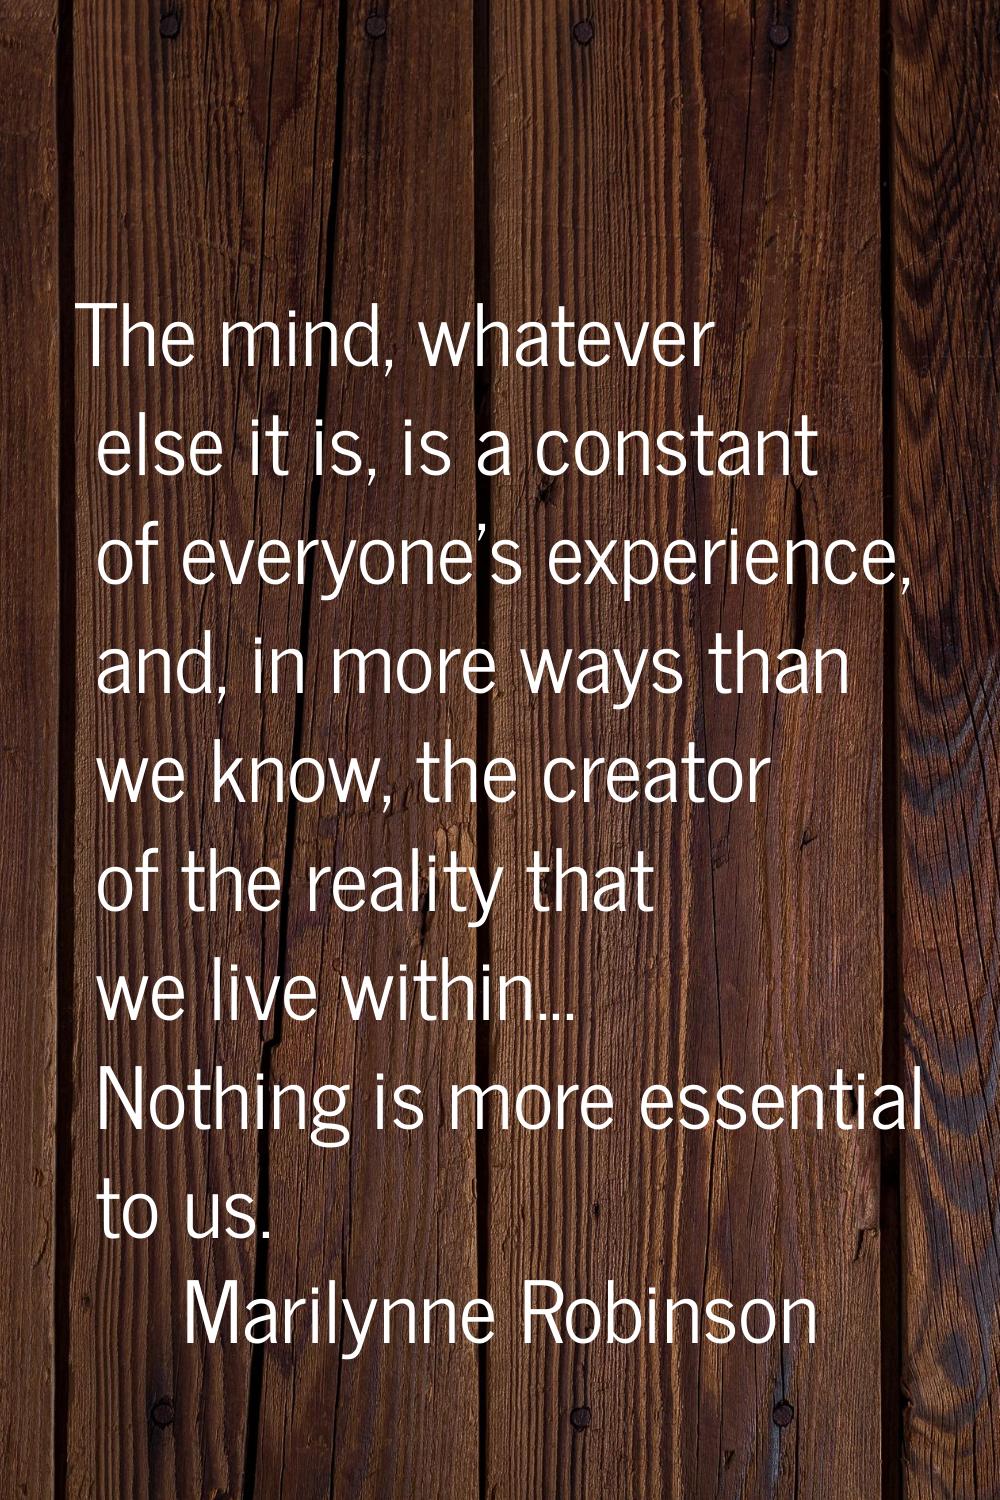 The mind, whatever else it is, is a constant of everyone's experience, and, in more ways than we kn